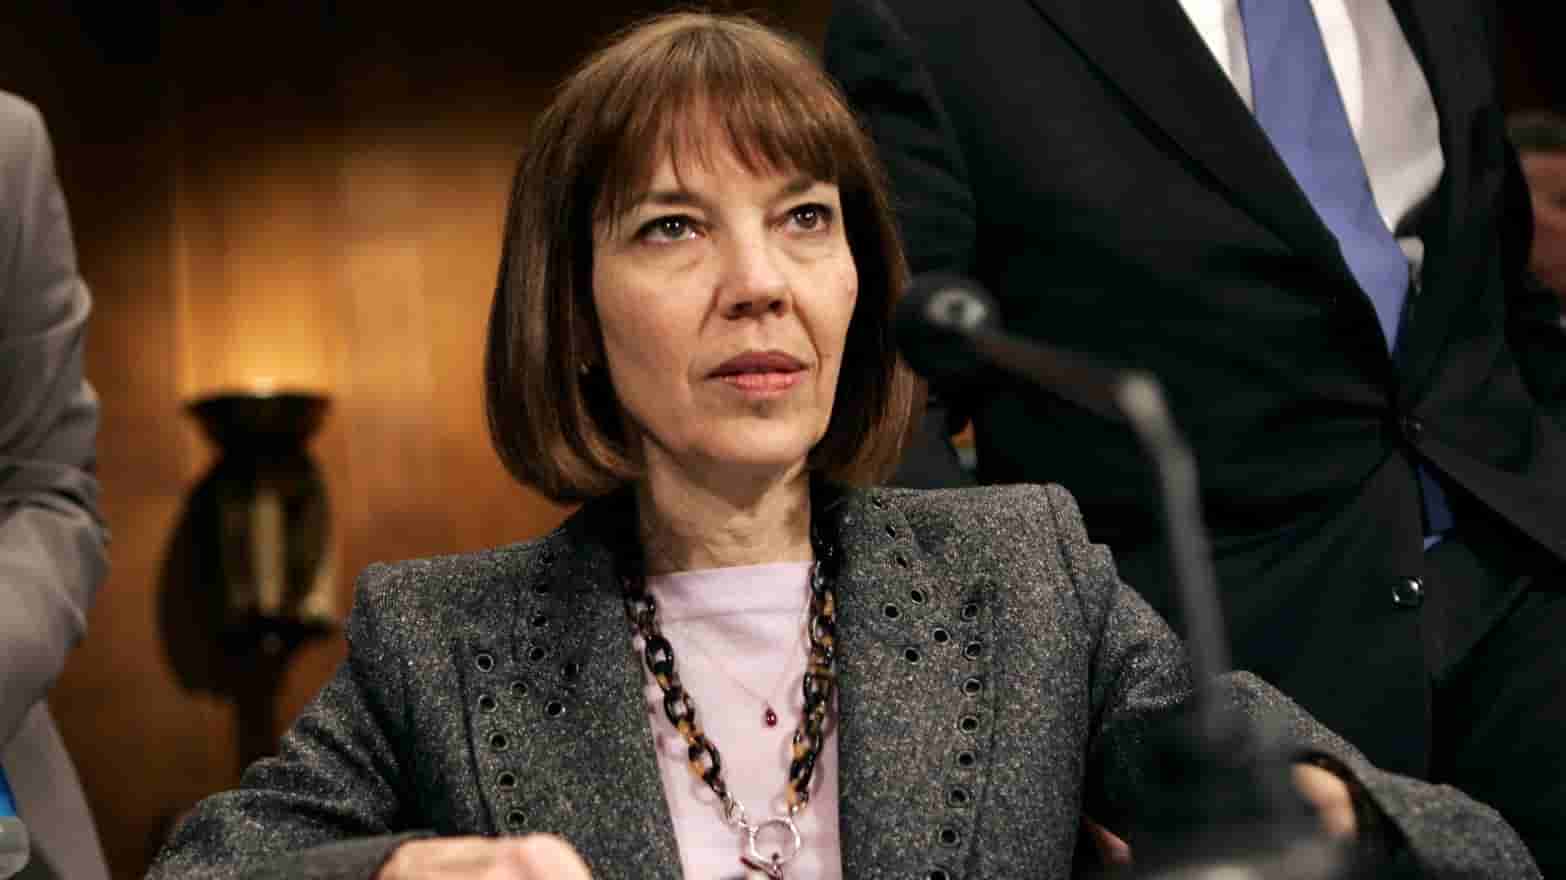 Antiques Roadshow Expert Judith Miller Passes Away at 71, Cause of death Explained